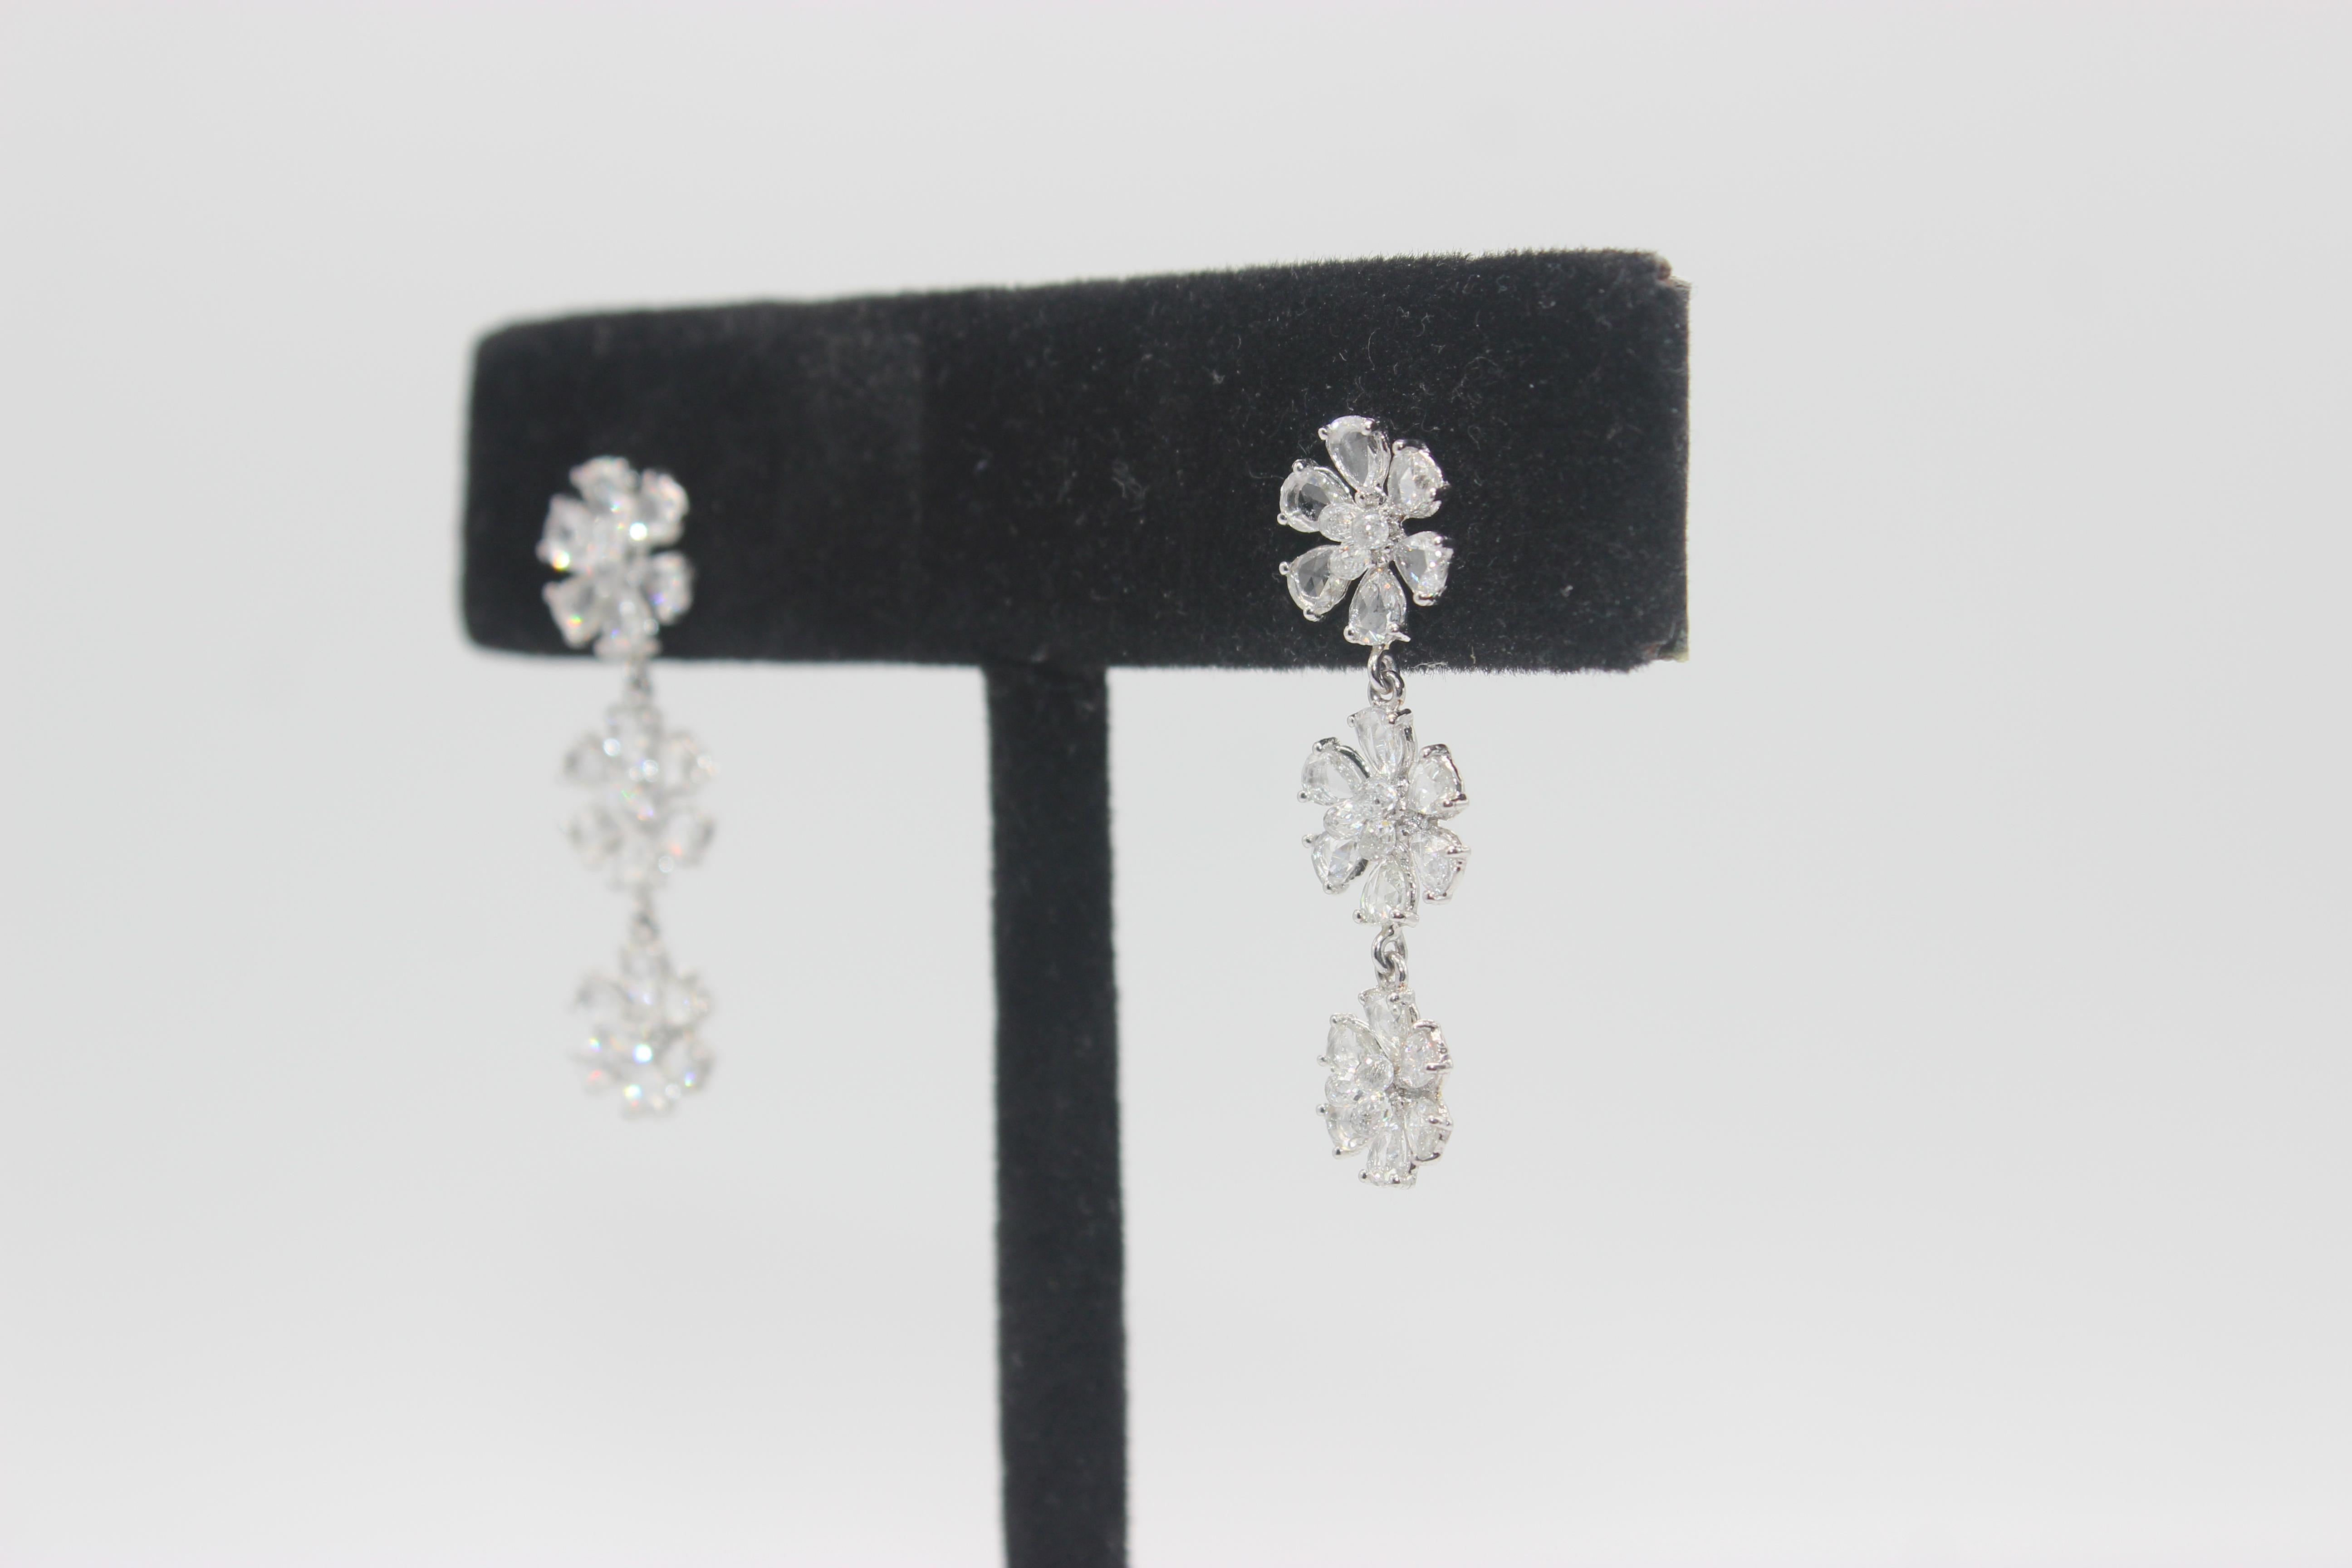 PANIM Diamond Rosecut and Briolette 18k White Gold Floral Earrings

Incredible diamond earrings are the acme of luxury.Diamond rosecut petals and a briolette sit in the core of these beautiful, highly polished 18 karat white gold earrings. Inspired